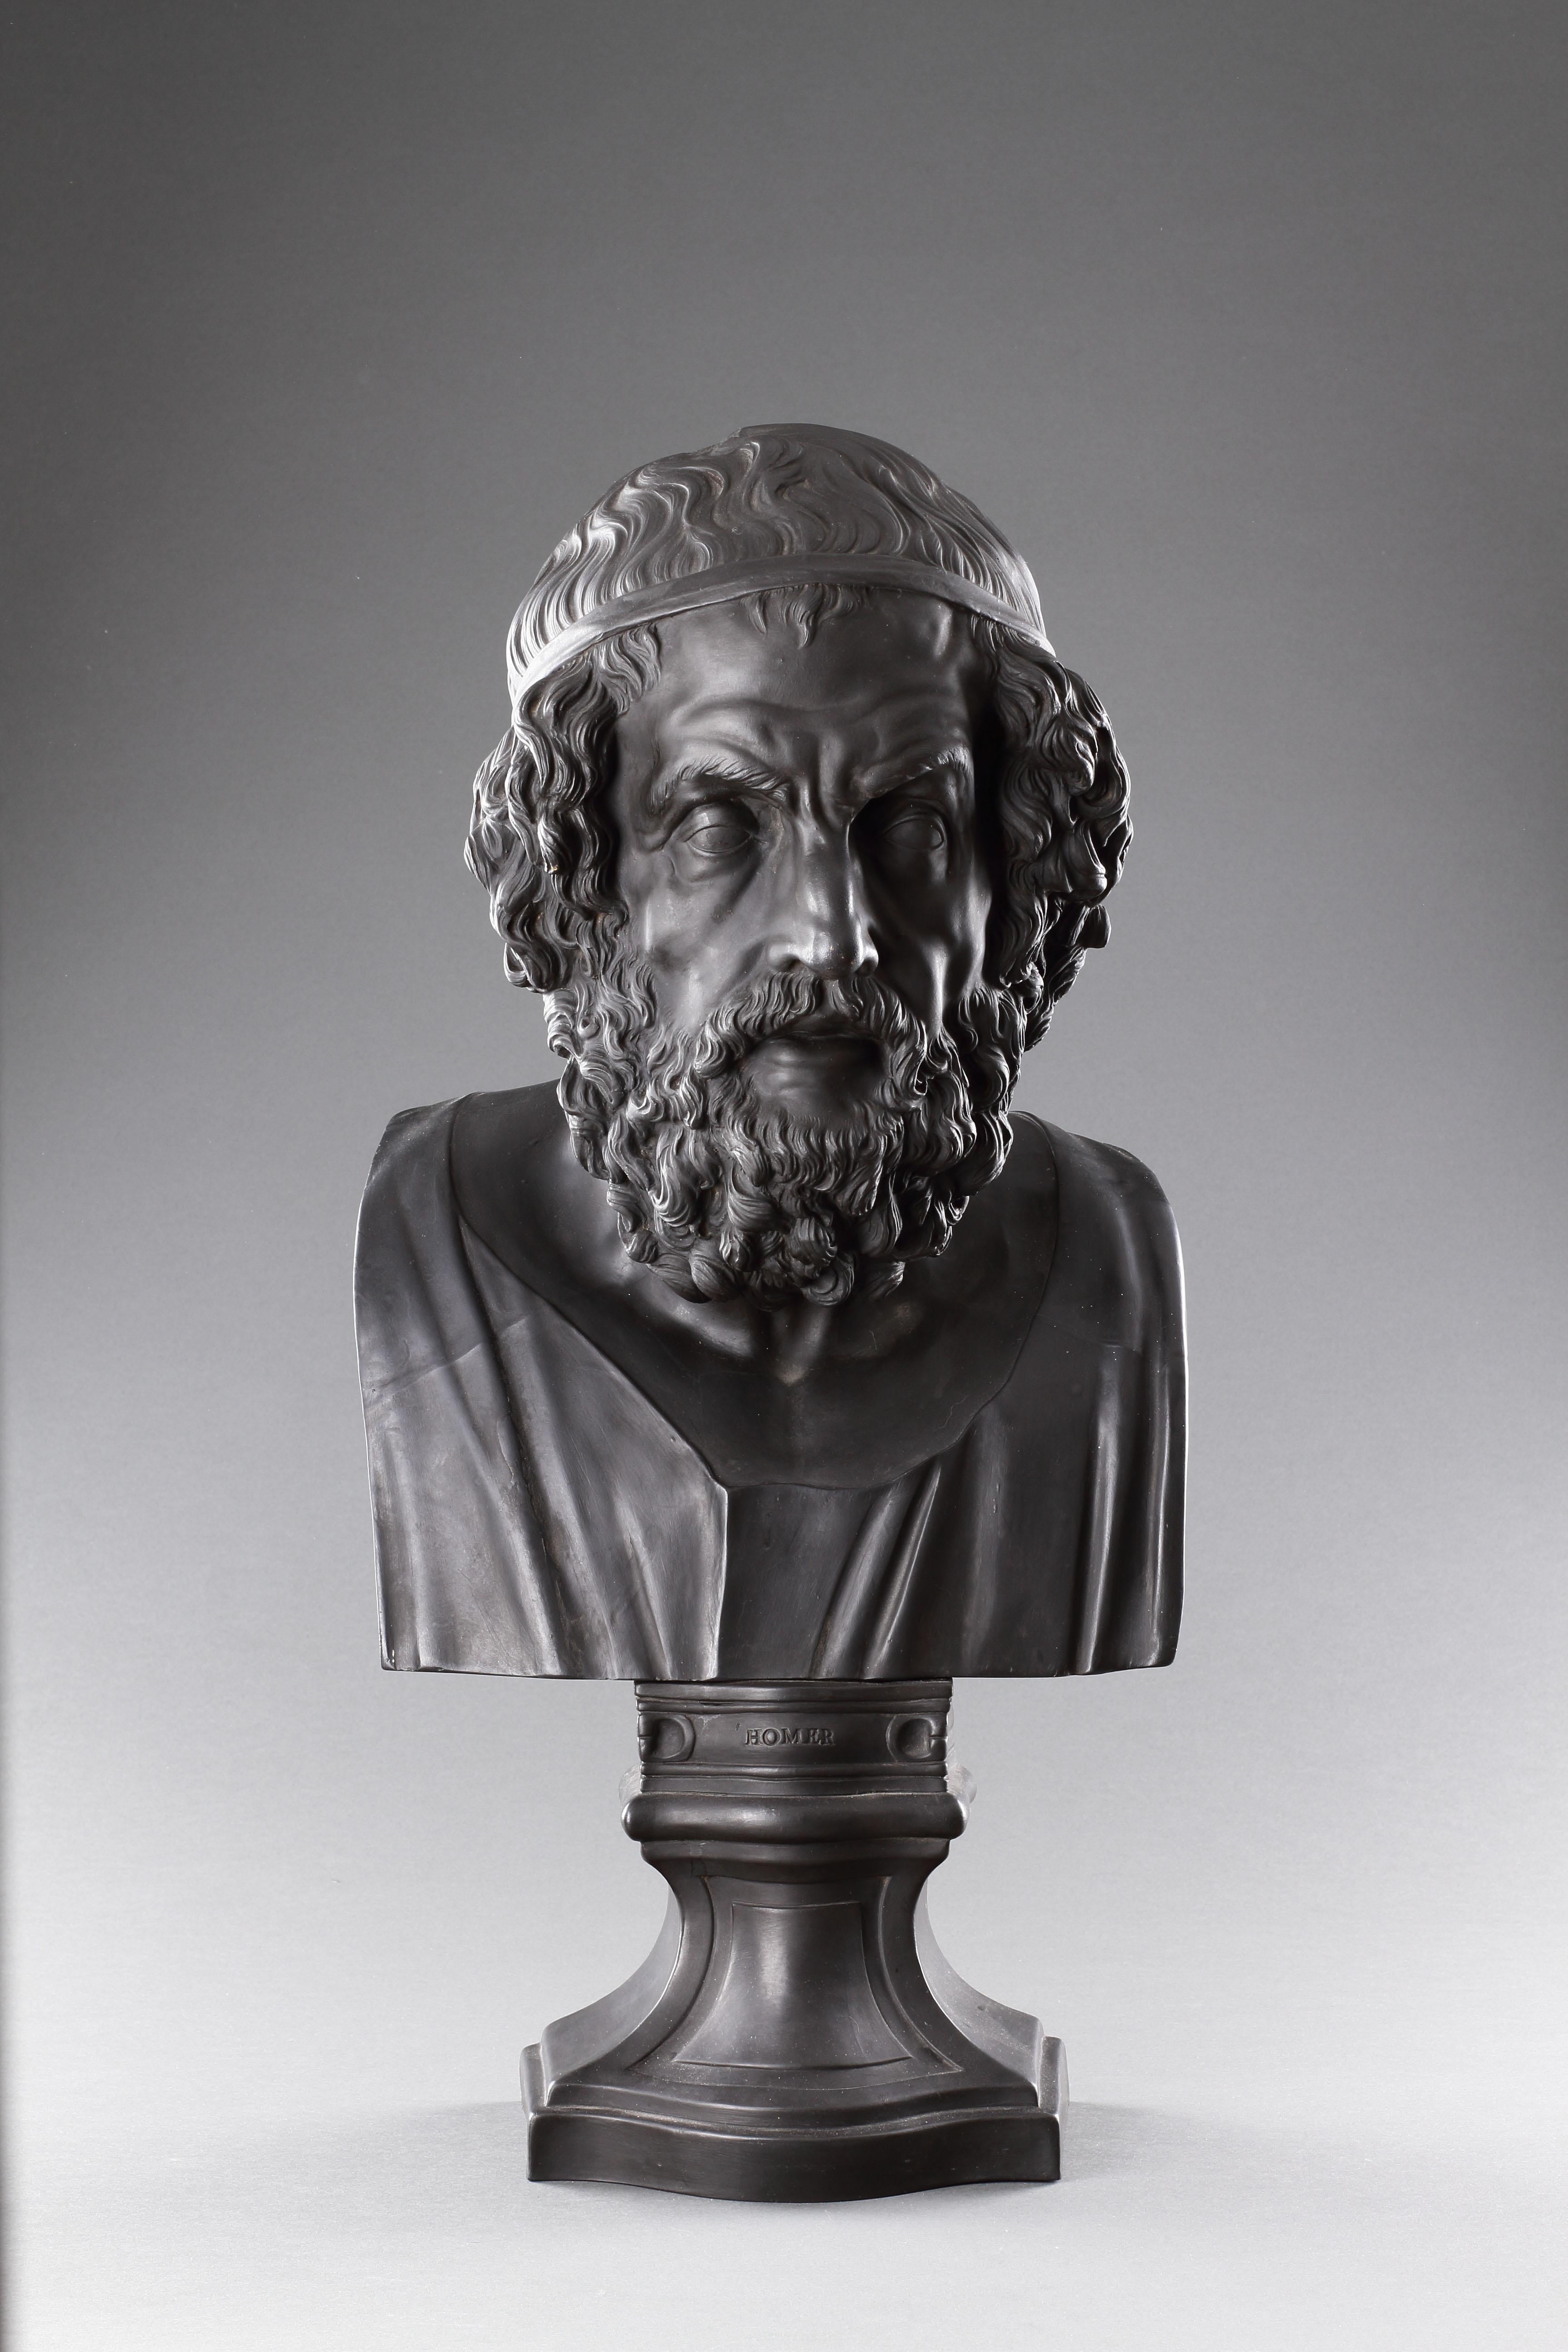 A Fine Large Wedgwood Black Basalt Library Bust of the Ancient Greek Epic Poet Homer
Impressed Wedgwood Mark 1780–1812
Early 19th Century

Size: 59cm high – 23¼ ins high 

Provenance:
Ex Finch and Co, catalogue number 19, 2012 
Ex Private English